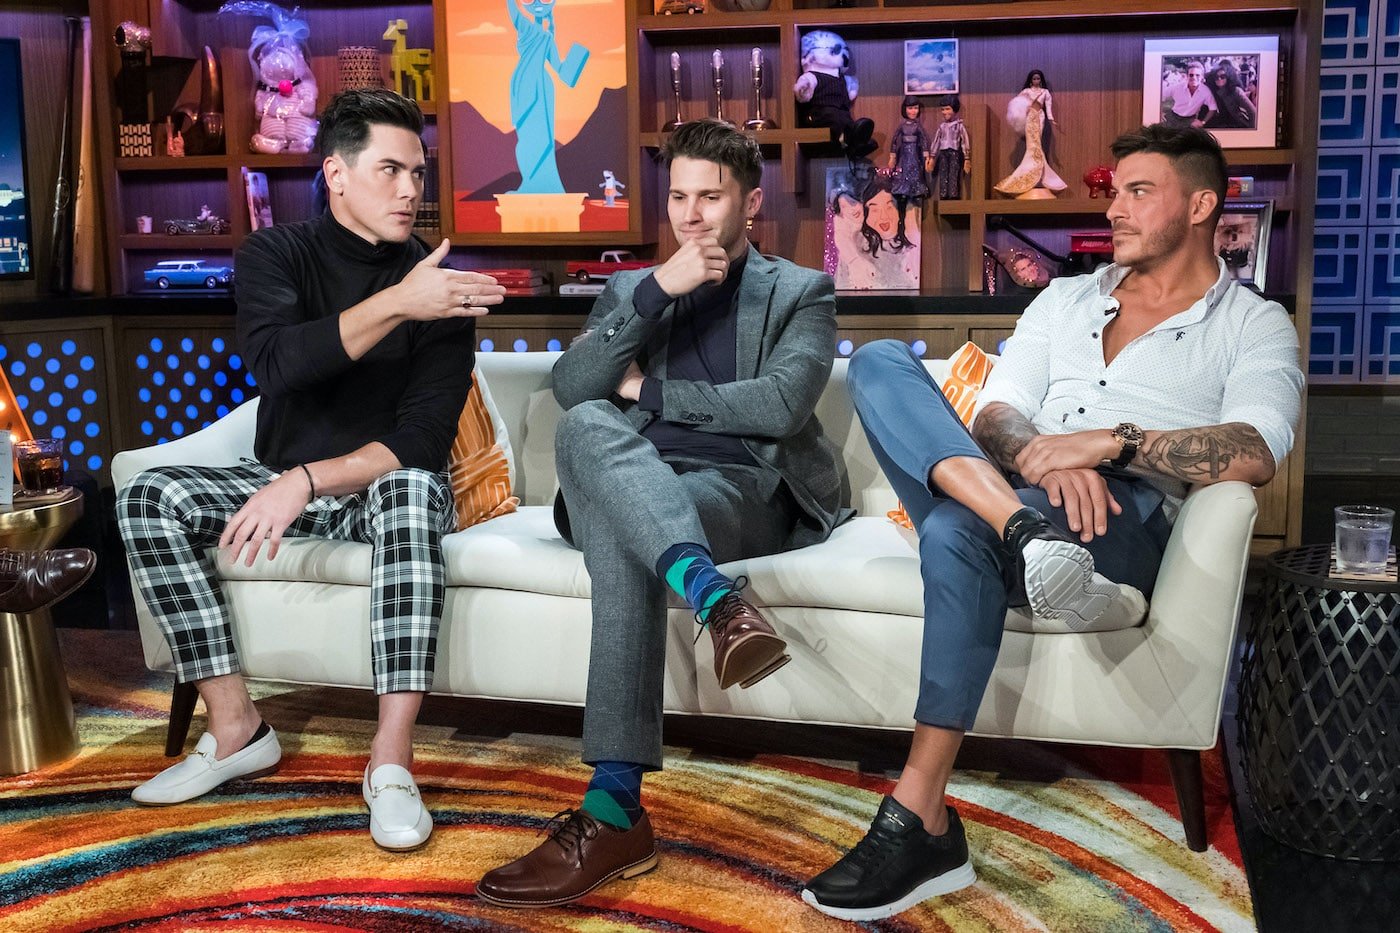 Tom Sandoval, Tom Schwartz and Jax Taylor from 'Vanderpump Rules' on the 'WWHL' couch